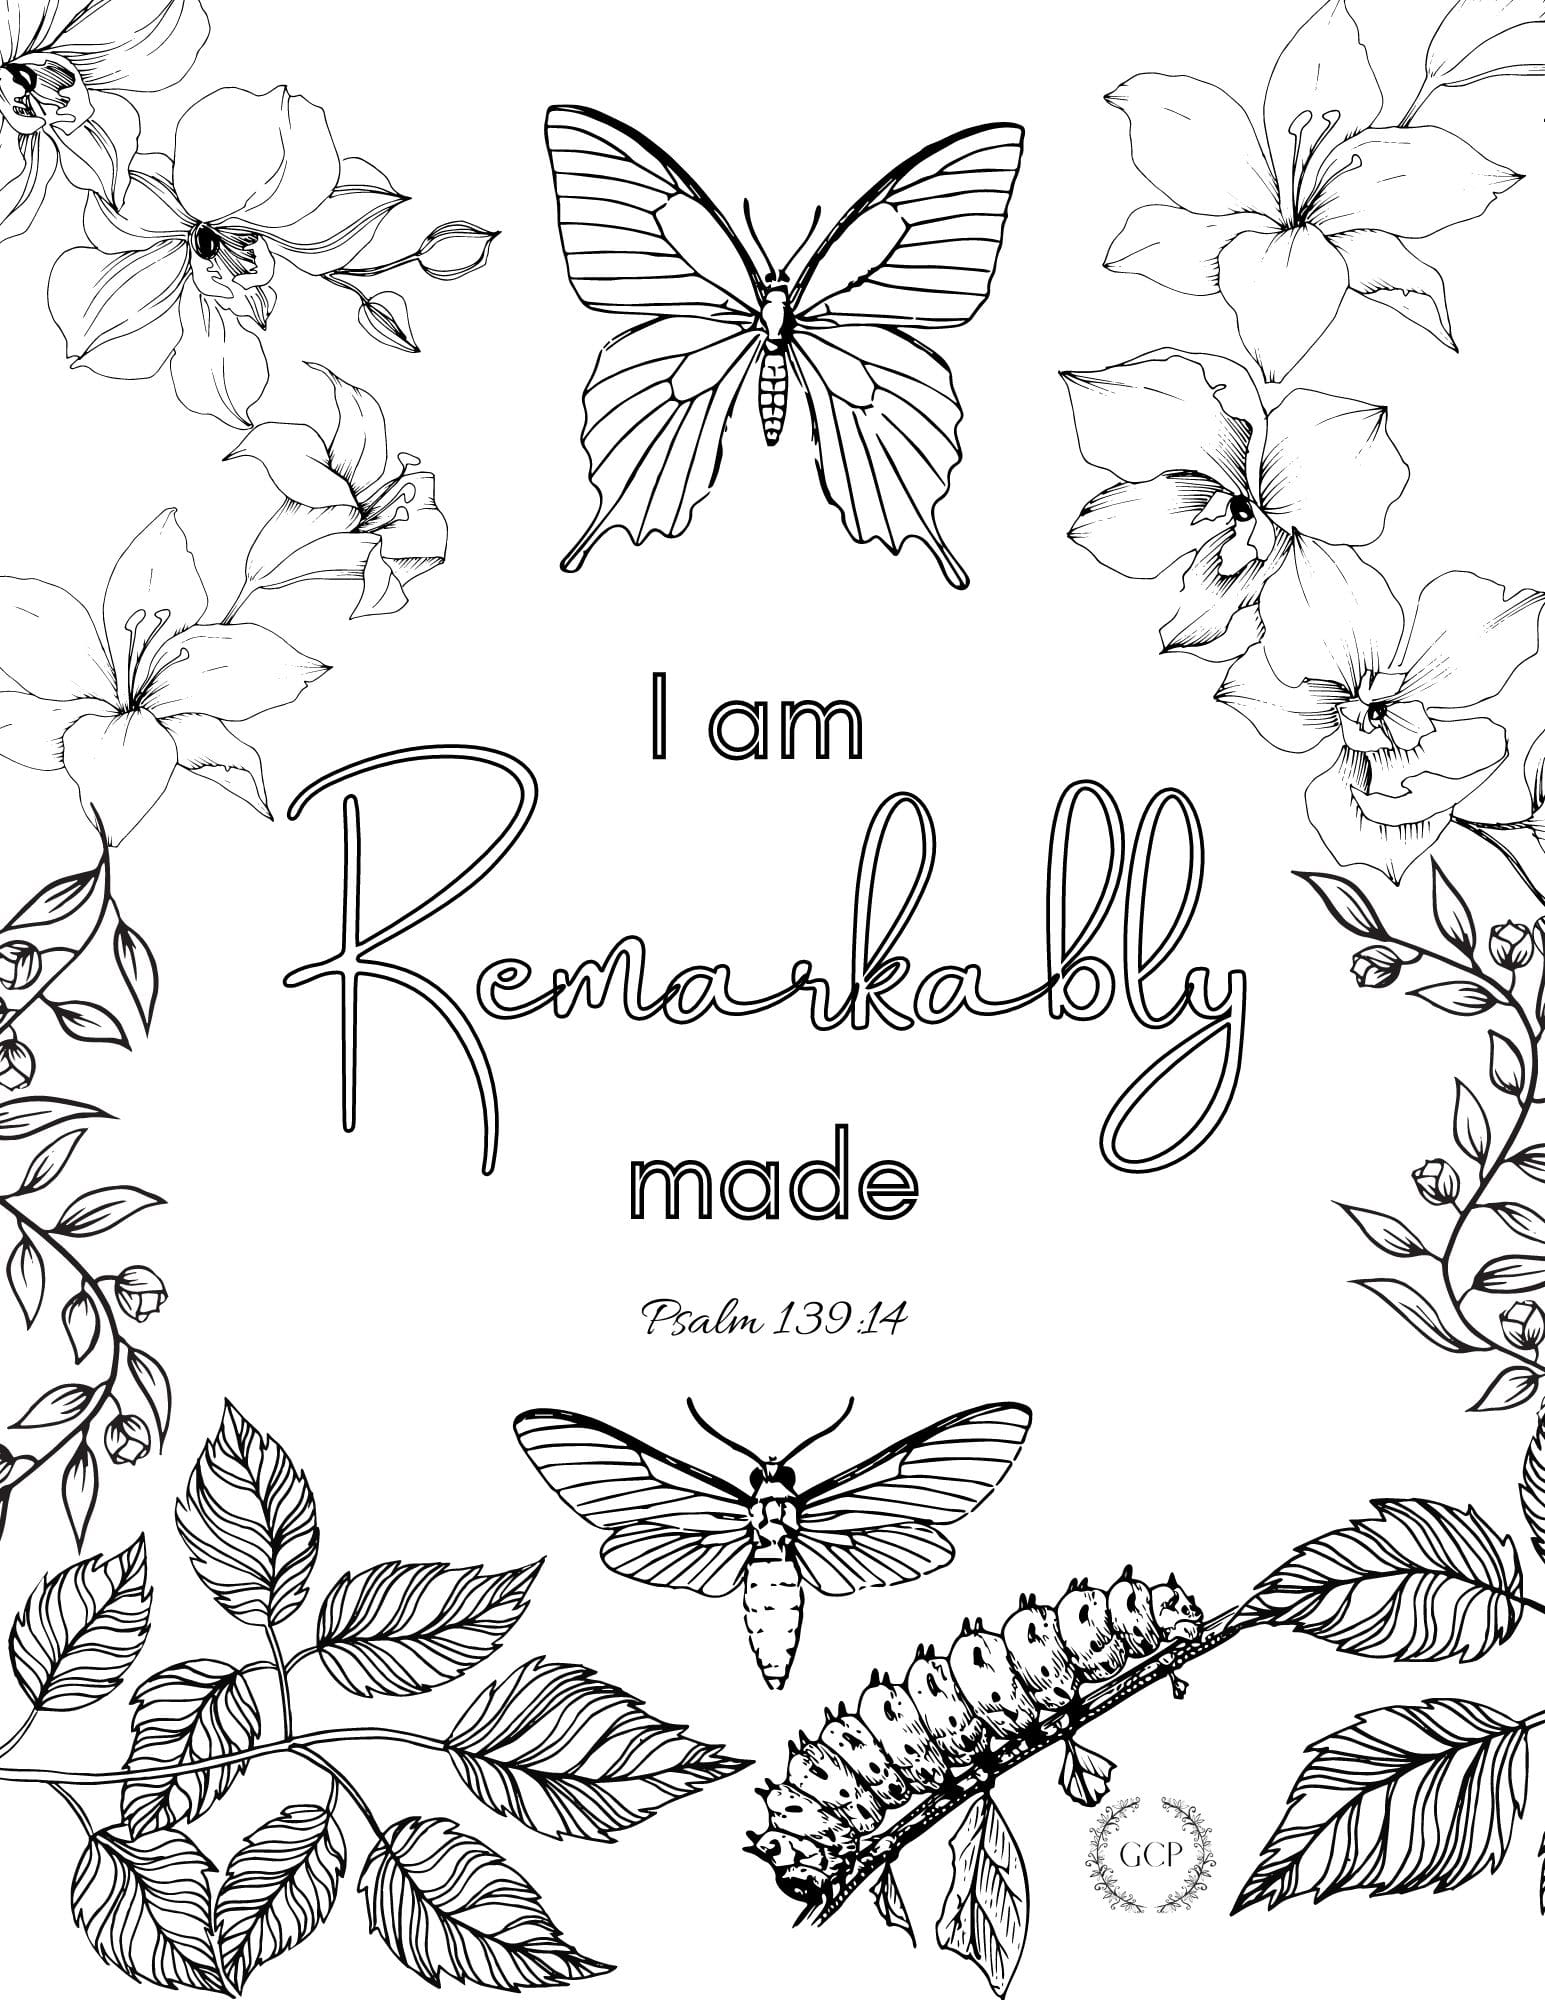 free christian coloring pages for adults | free bible verse coloring pages pdf | free printable bible coloring pages with scriptures